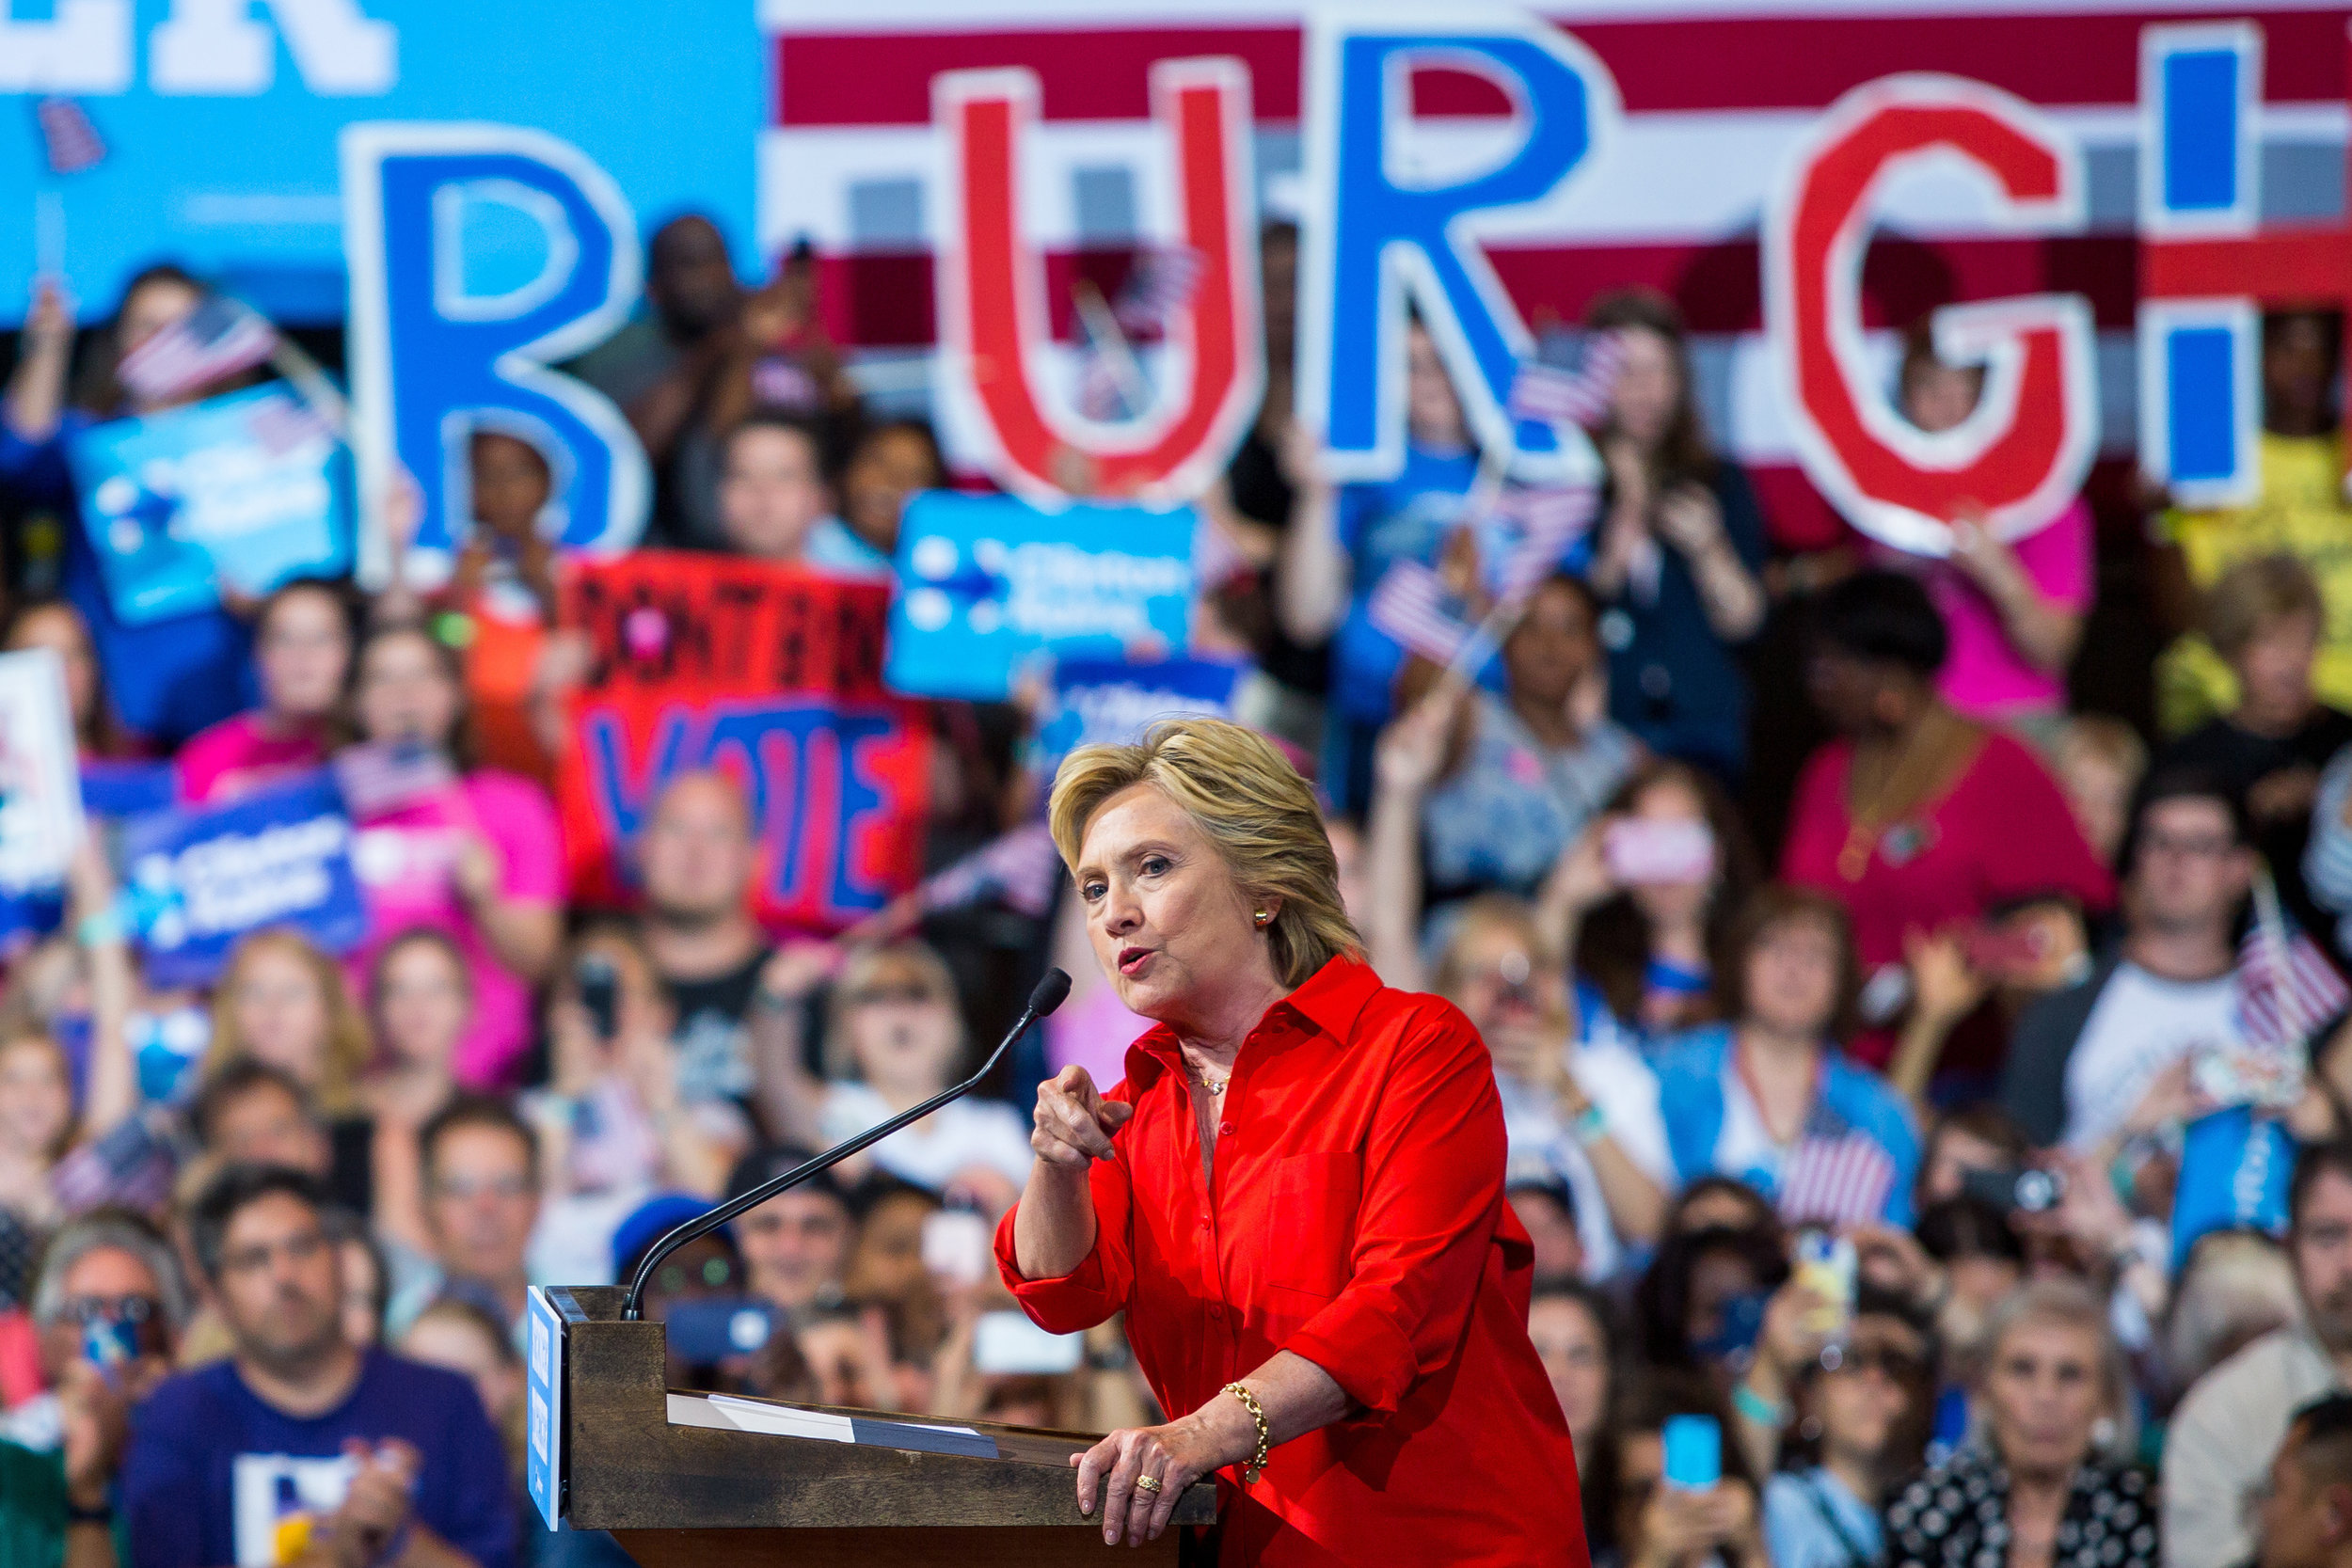  Hillary Clinton speaks about her intended policies and the threats of competitor Donald Trump in Pittsburgh on Saturday evening. Clinton spoke to a full room and thousands of overflow in Pittsburgh and has clenched the democratic nomination and is t